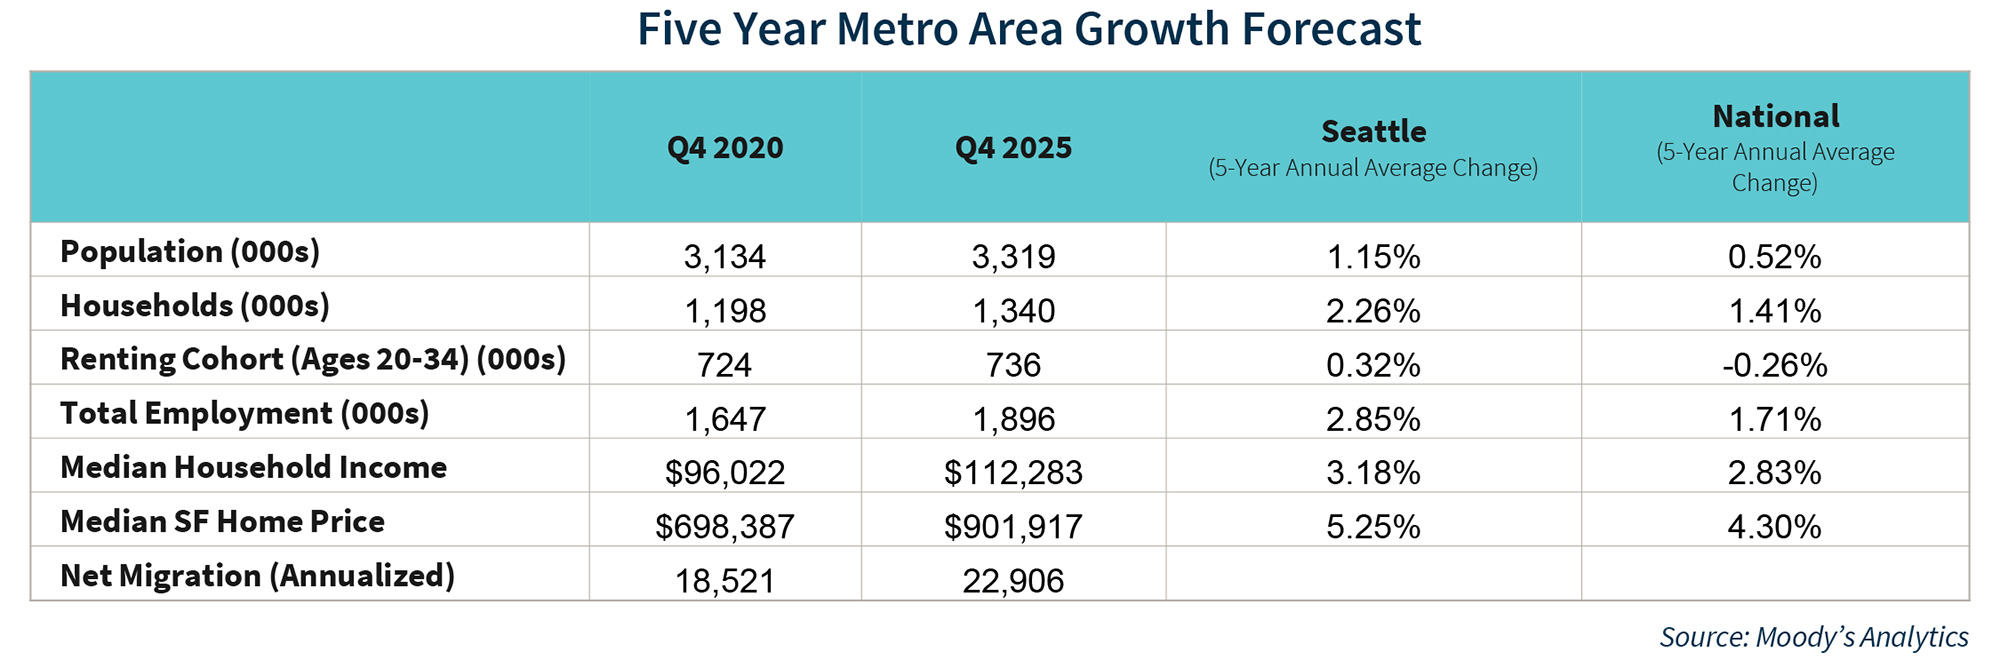 Five Year Metro Area Growth Forecast